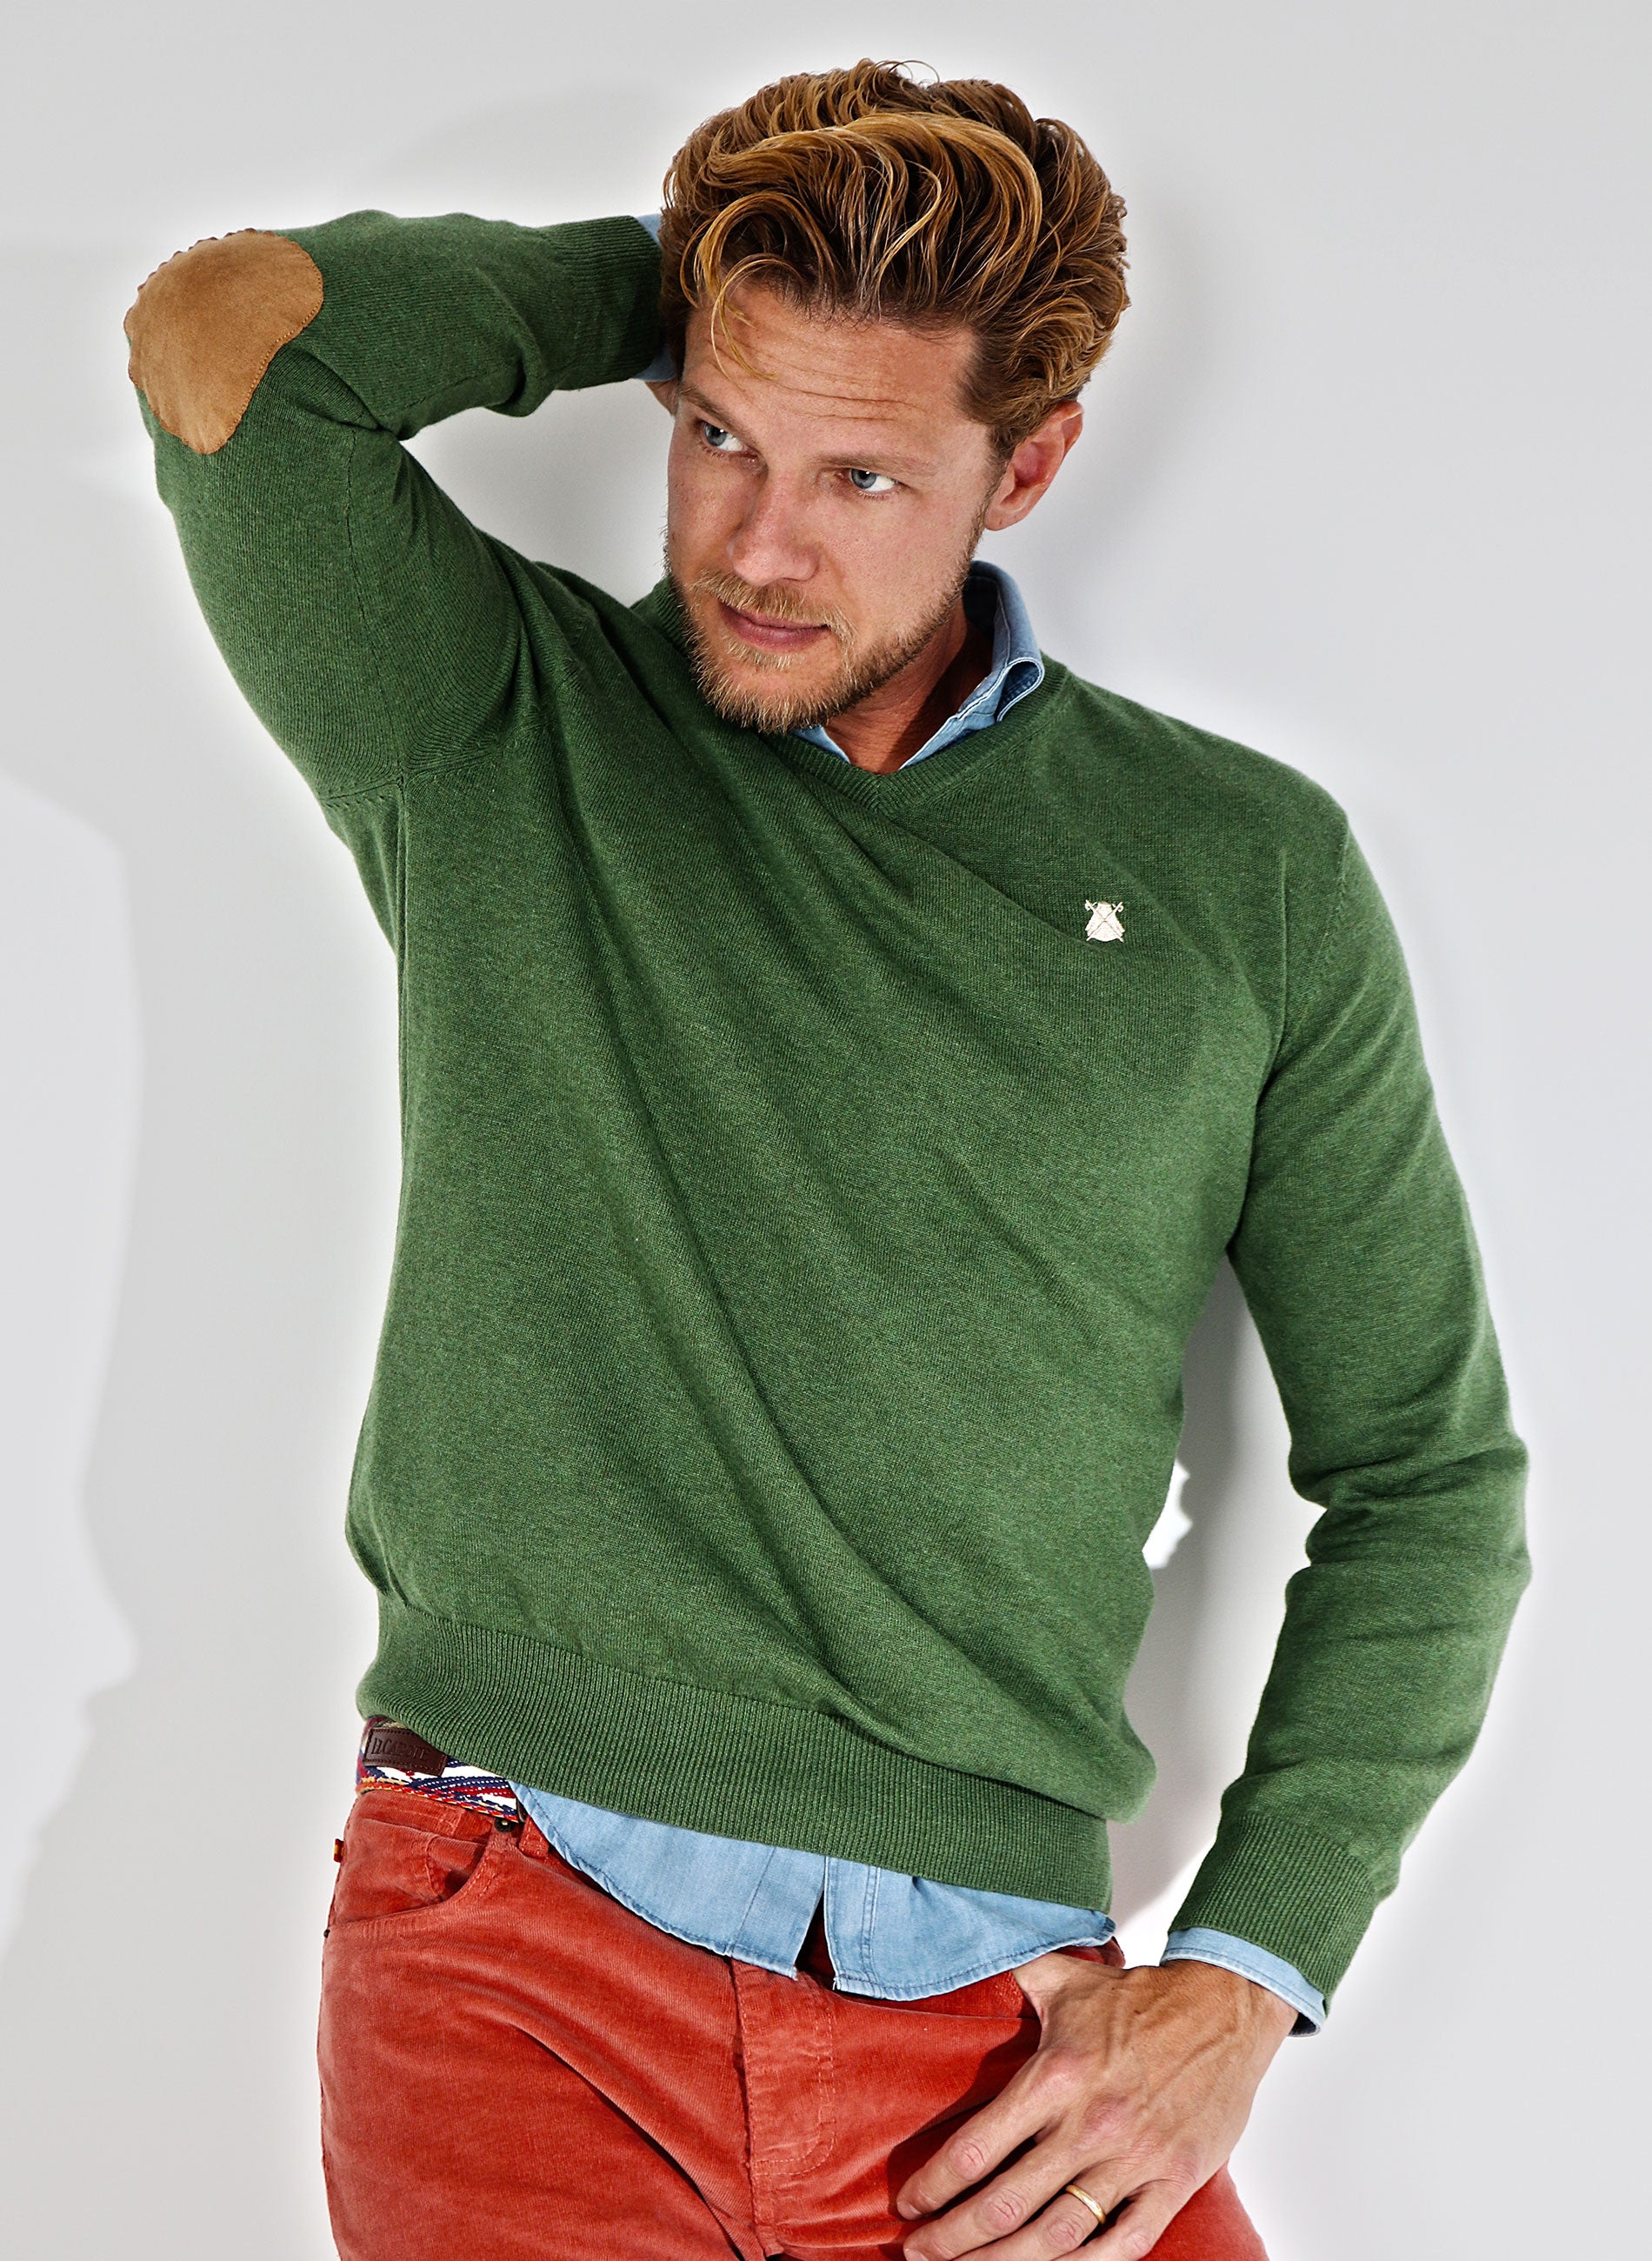 Green Sweater V-Neck Elbow Pads Man